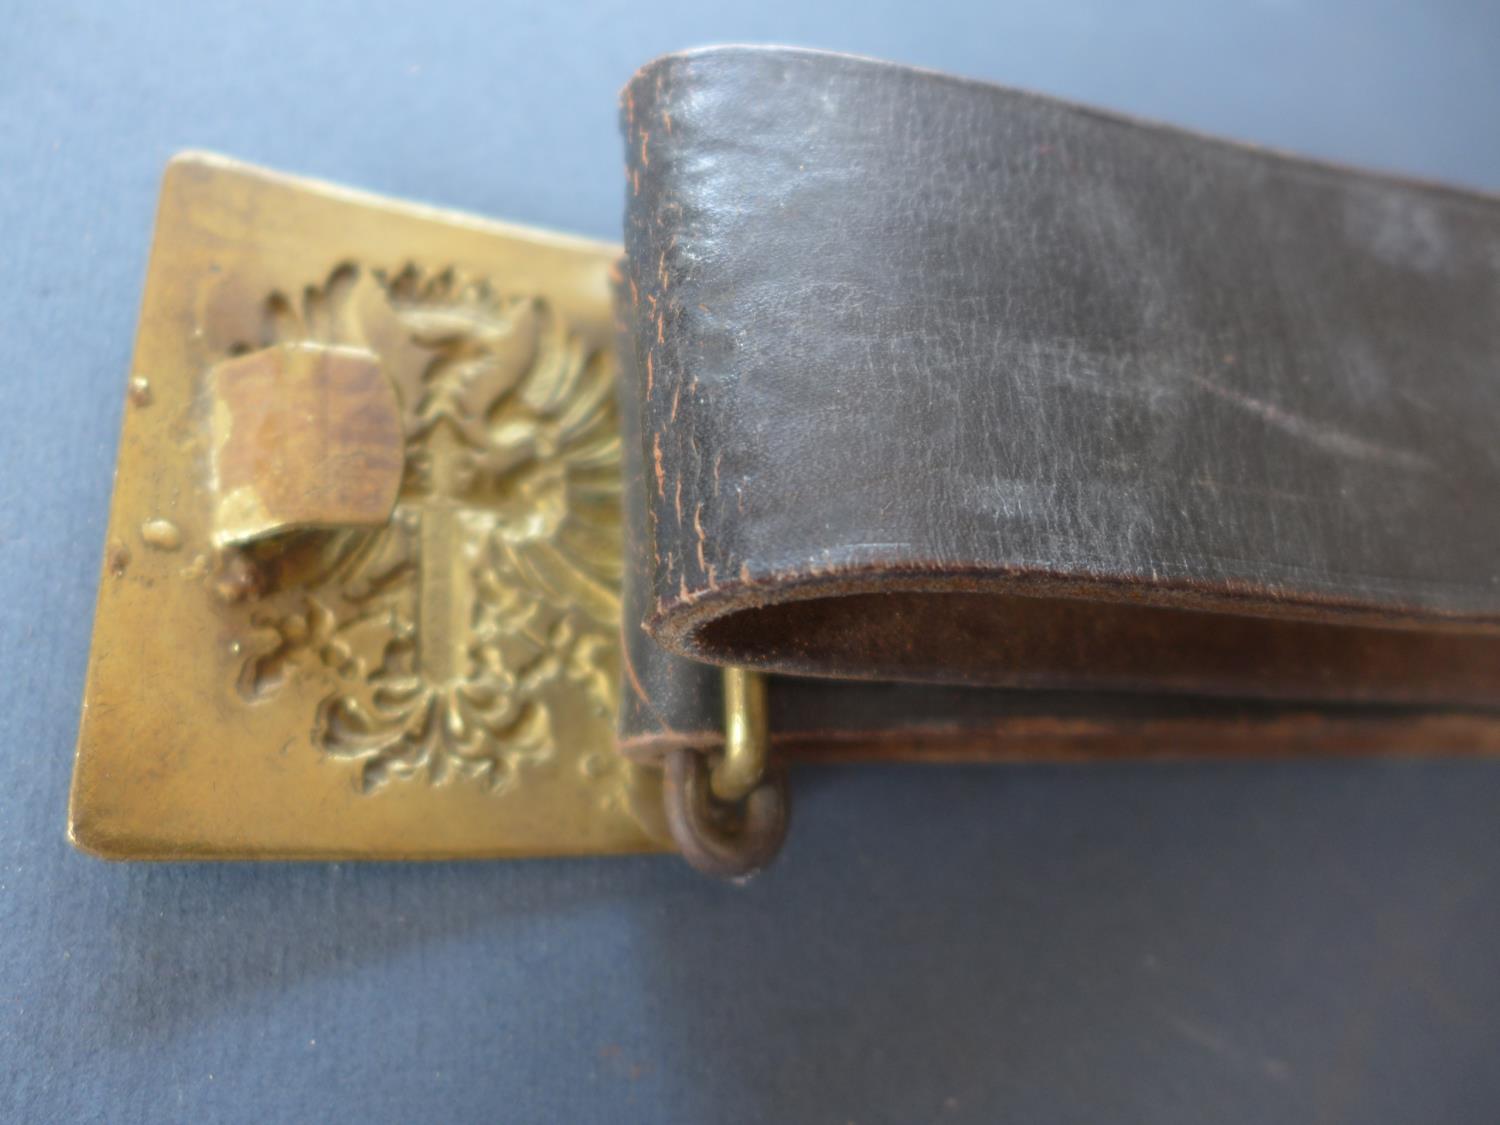 A MILITARY LEATHER BELT AND BUCKLE - Image 3 of 3